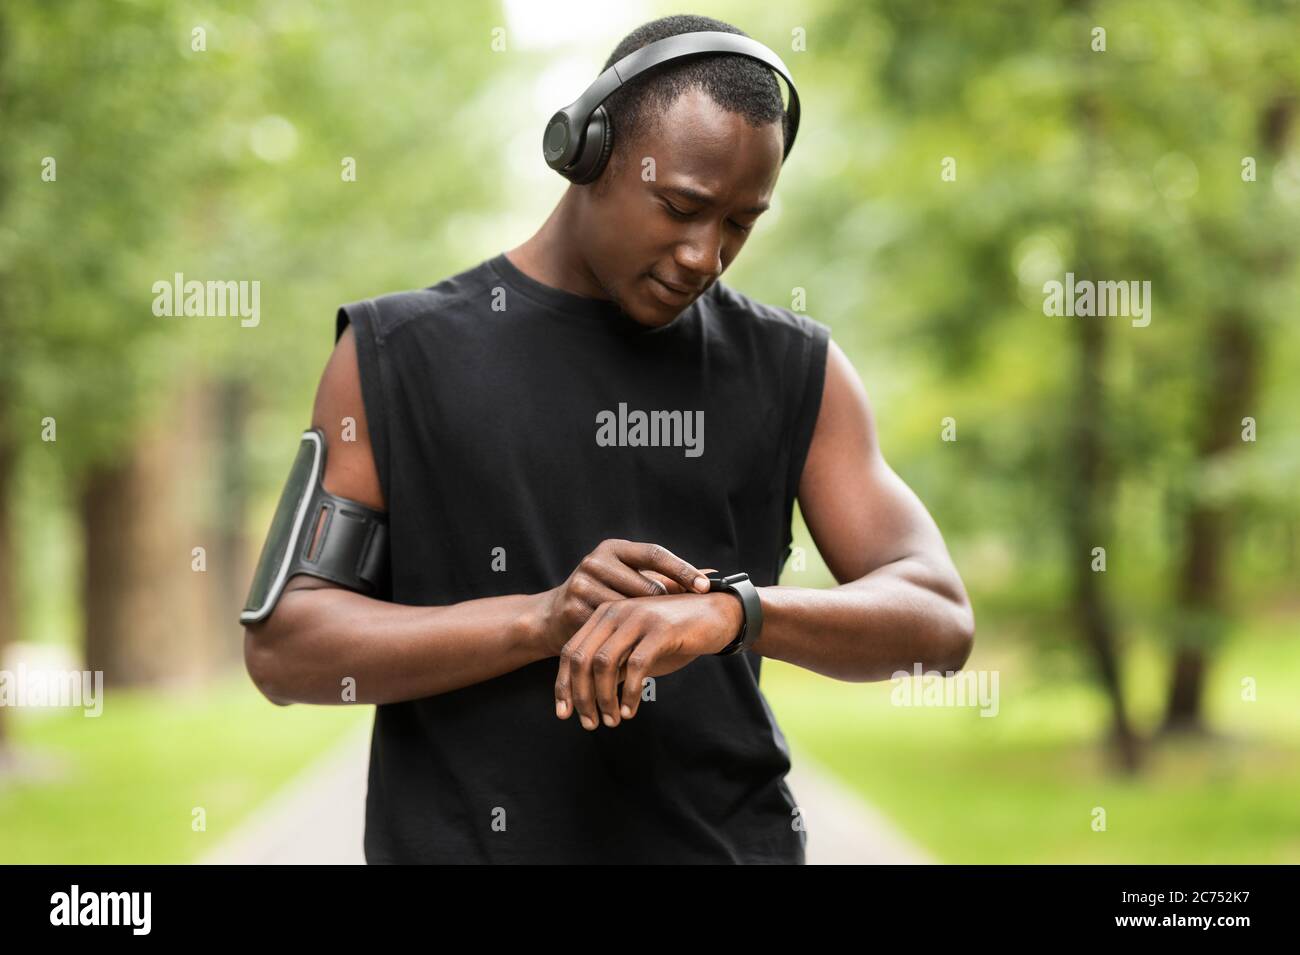 African man working out with fitness bracelet Stock Photo